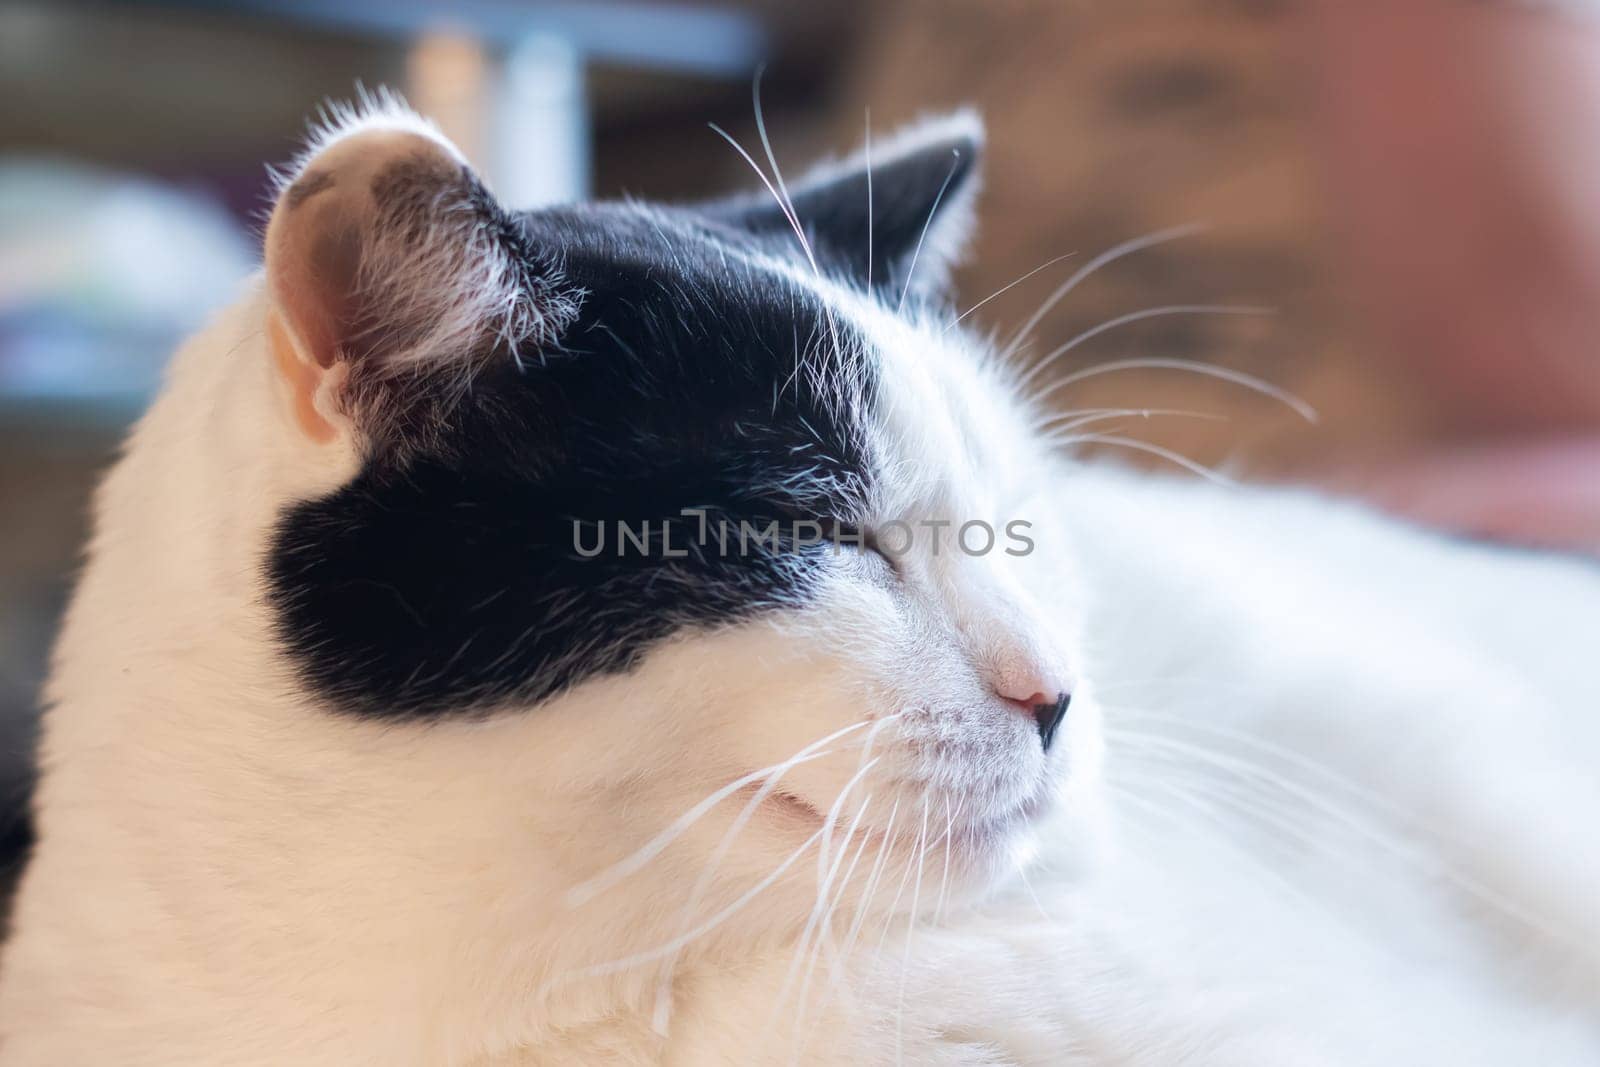 Black and white cat at home close up portrait